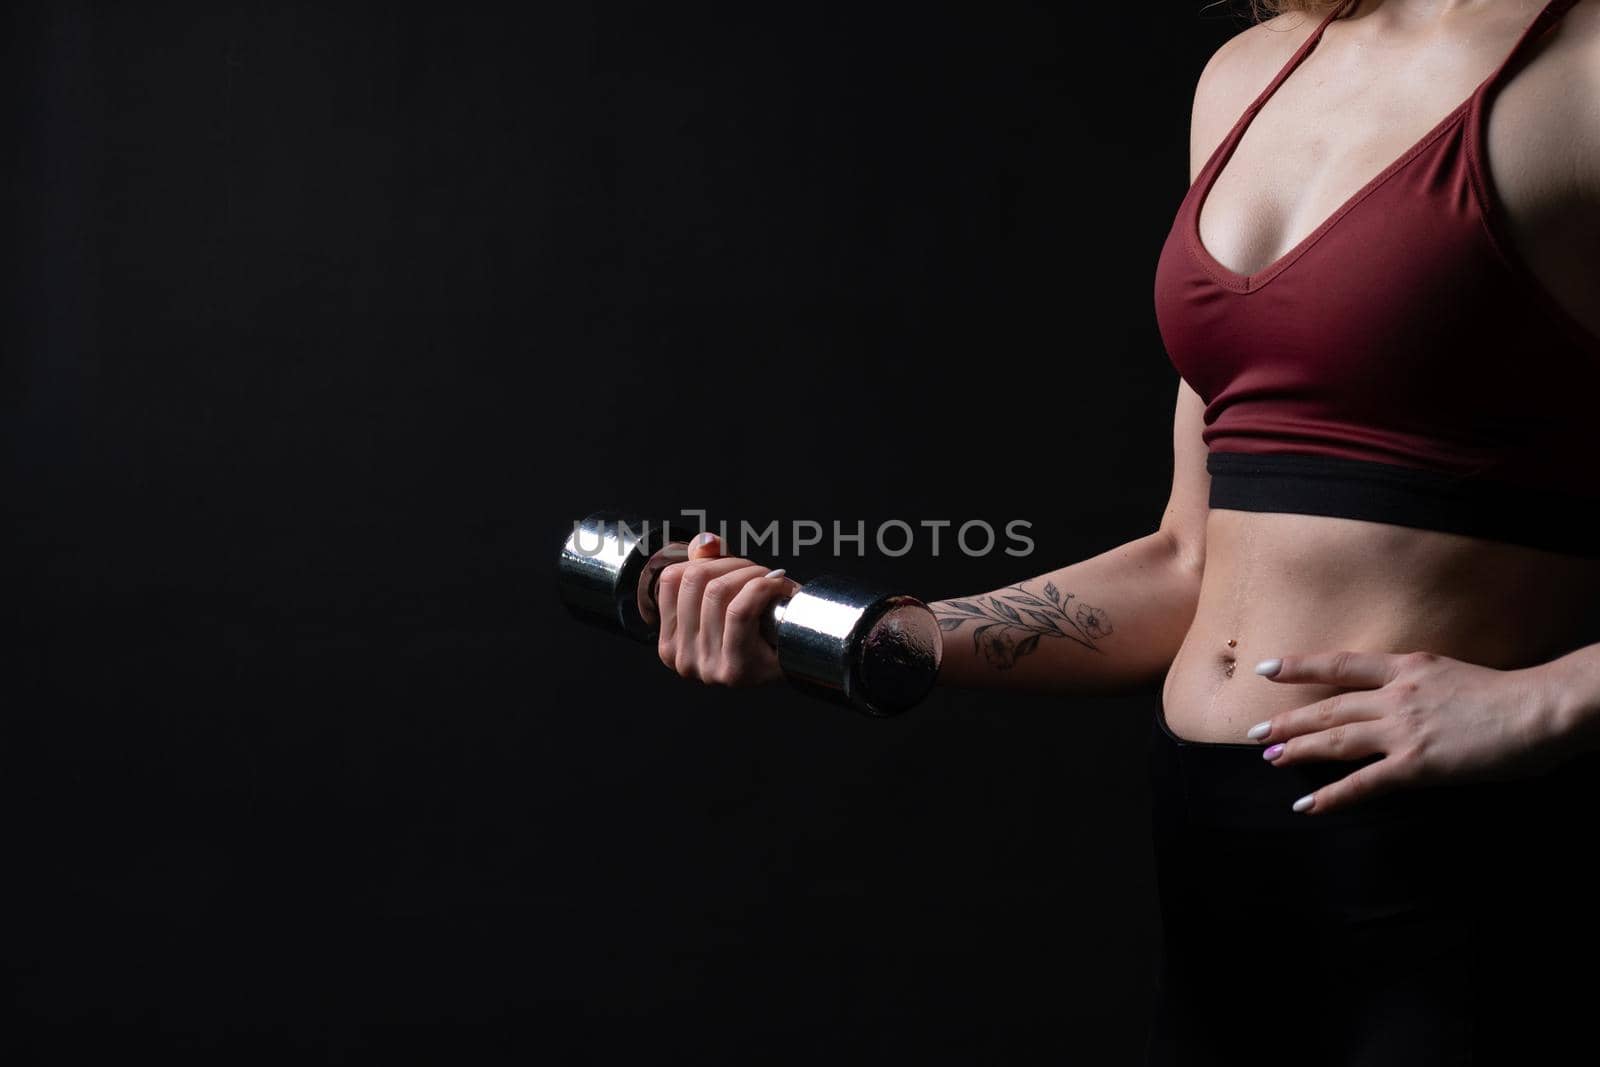 A kira her shiny in holds knightly beautiful dumbbells as hands girl dumbbells sports body, for health lifestyle in young and trainer strength, strong biceps. Care ABS bodybuilder, power